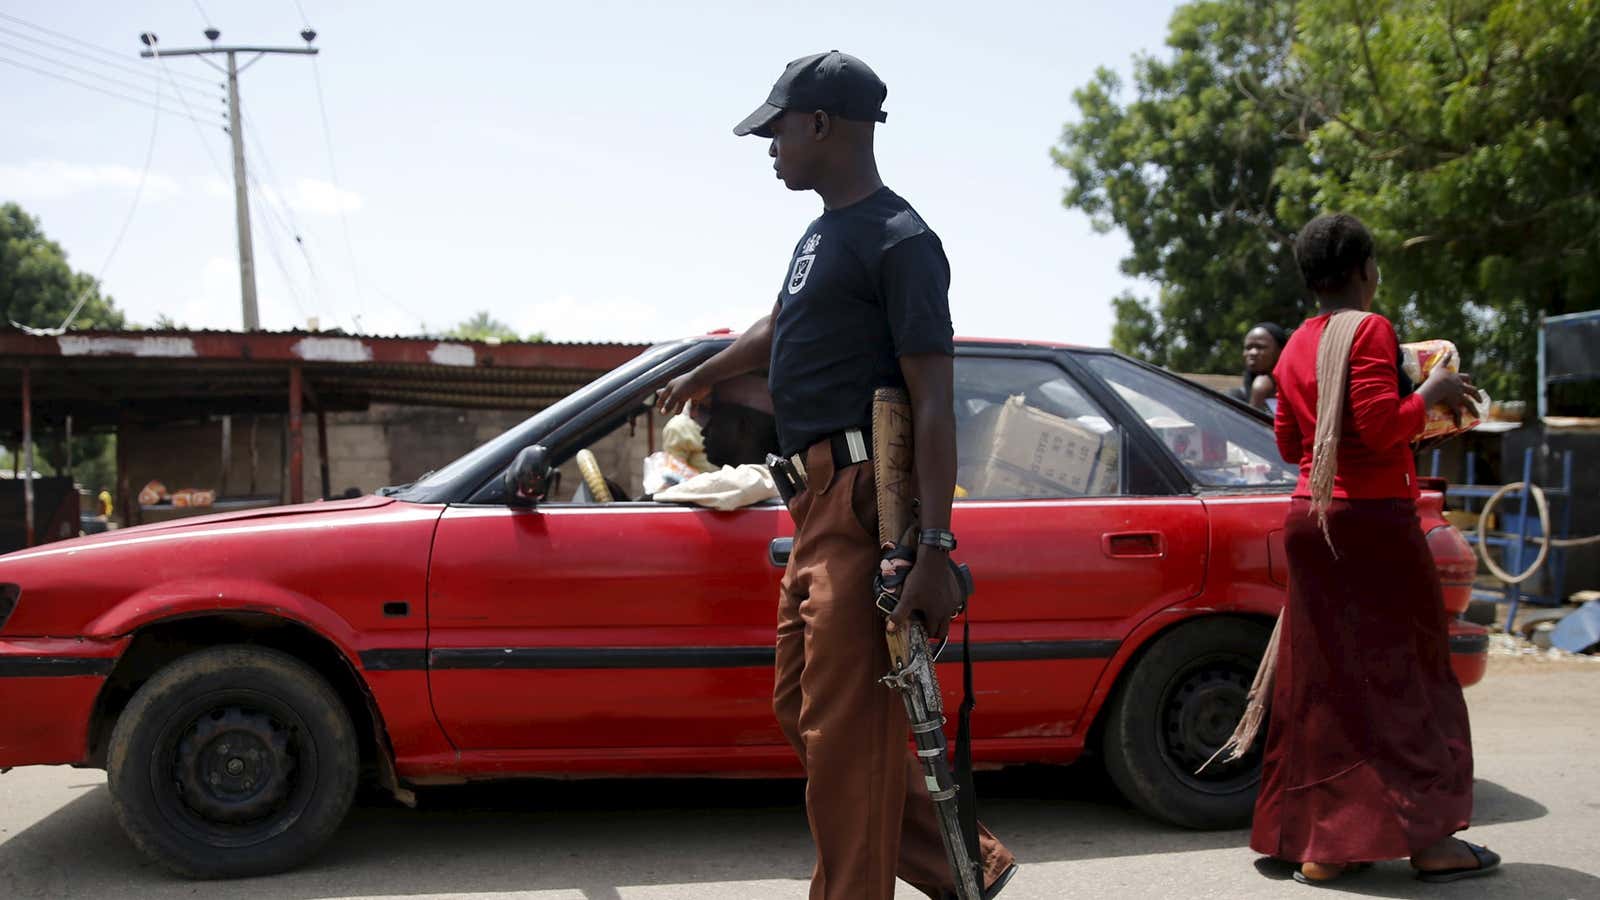 Will Boko Haram’s reign of terror end?